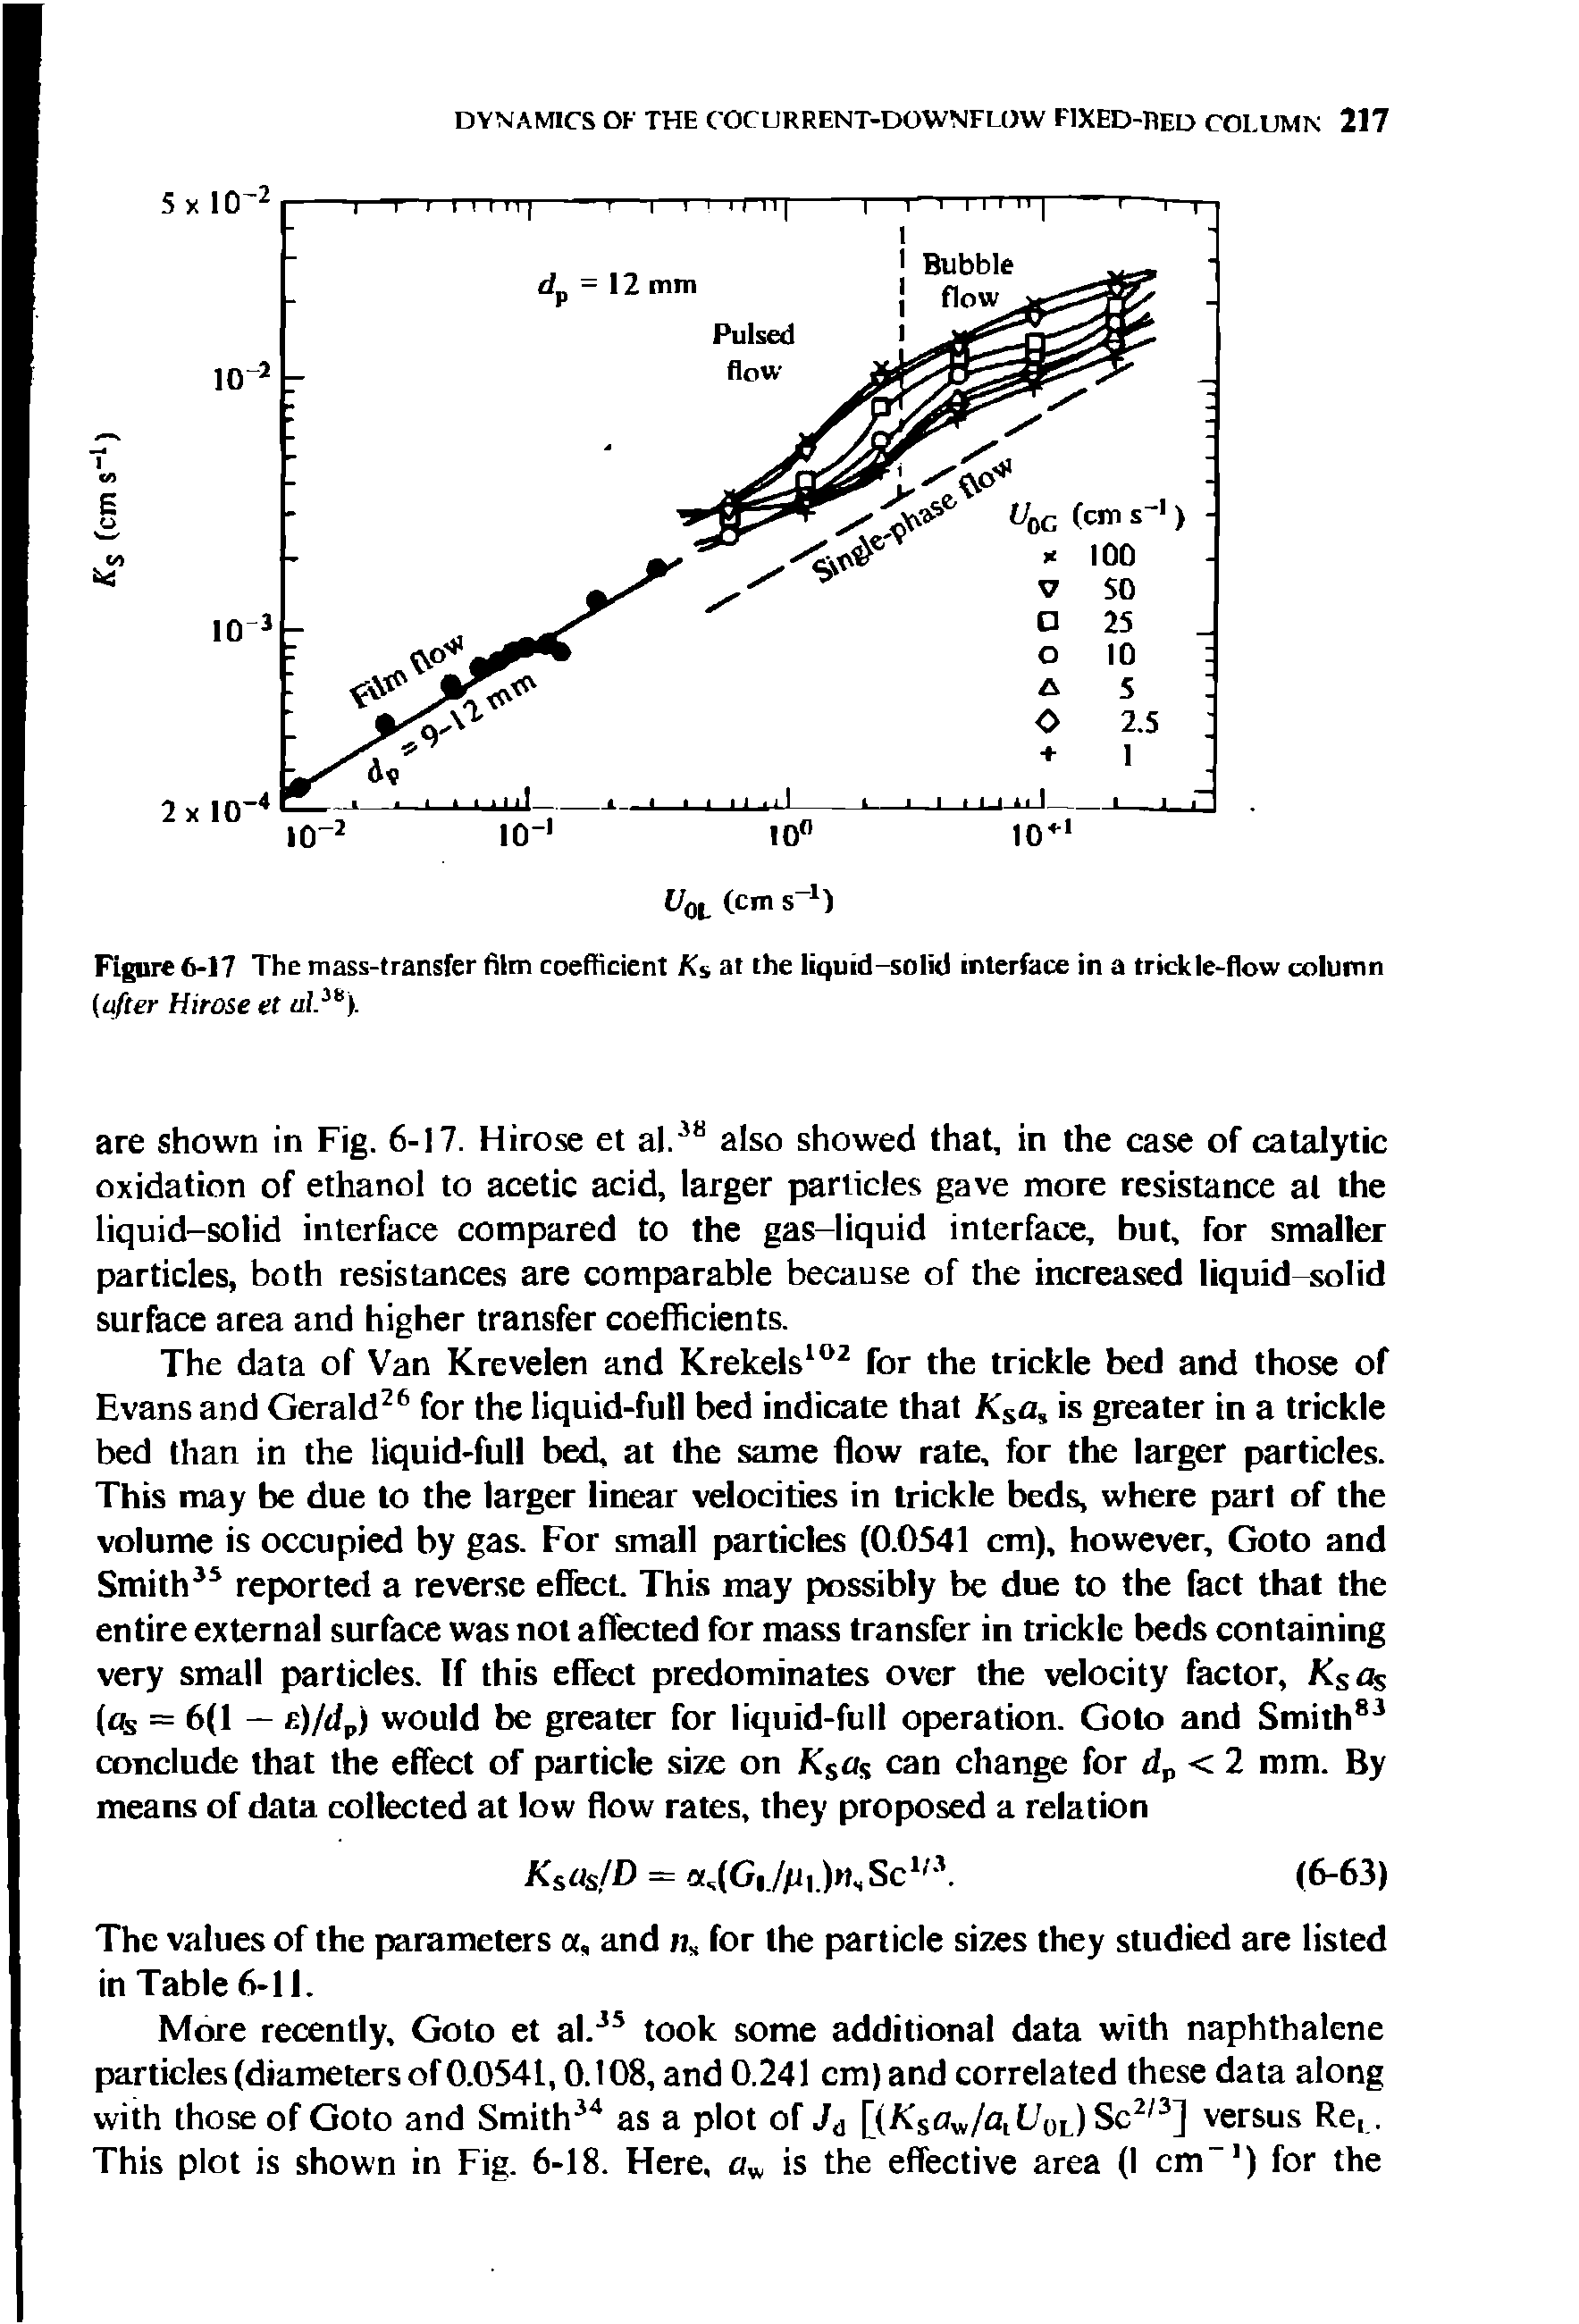 Figure 6-17 The mass-transfer film coefficient Ks at the liquid-solid interface in a trickle-flow column...